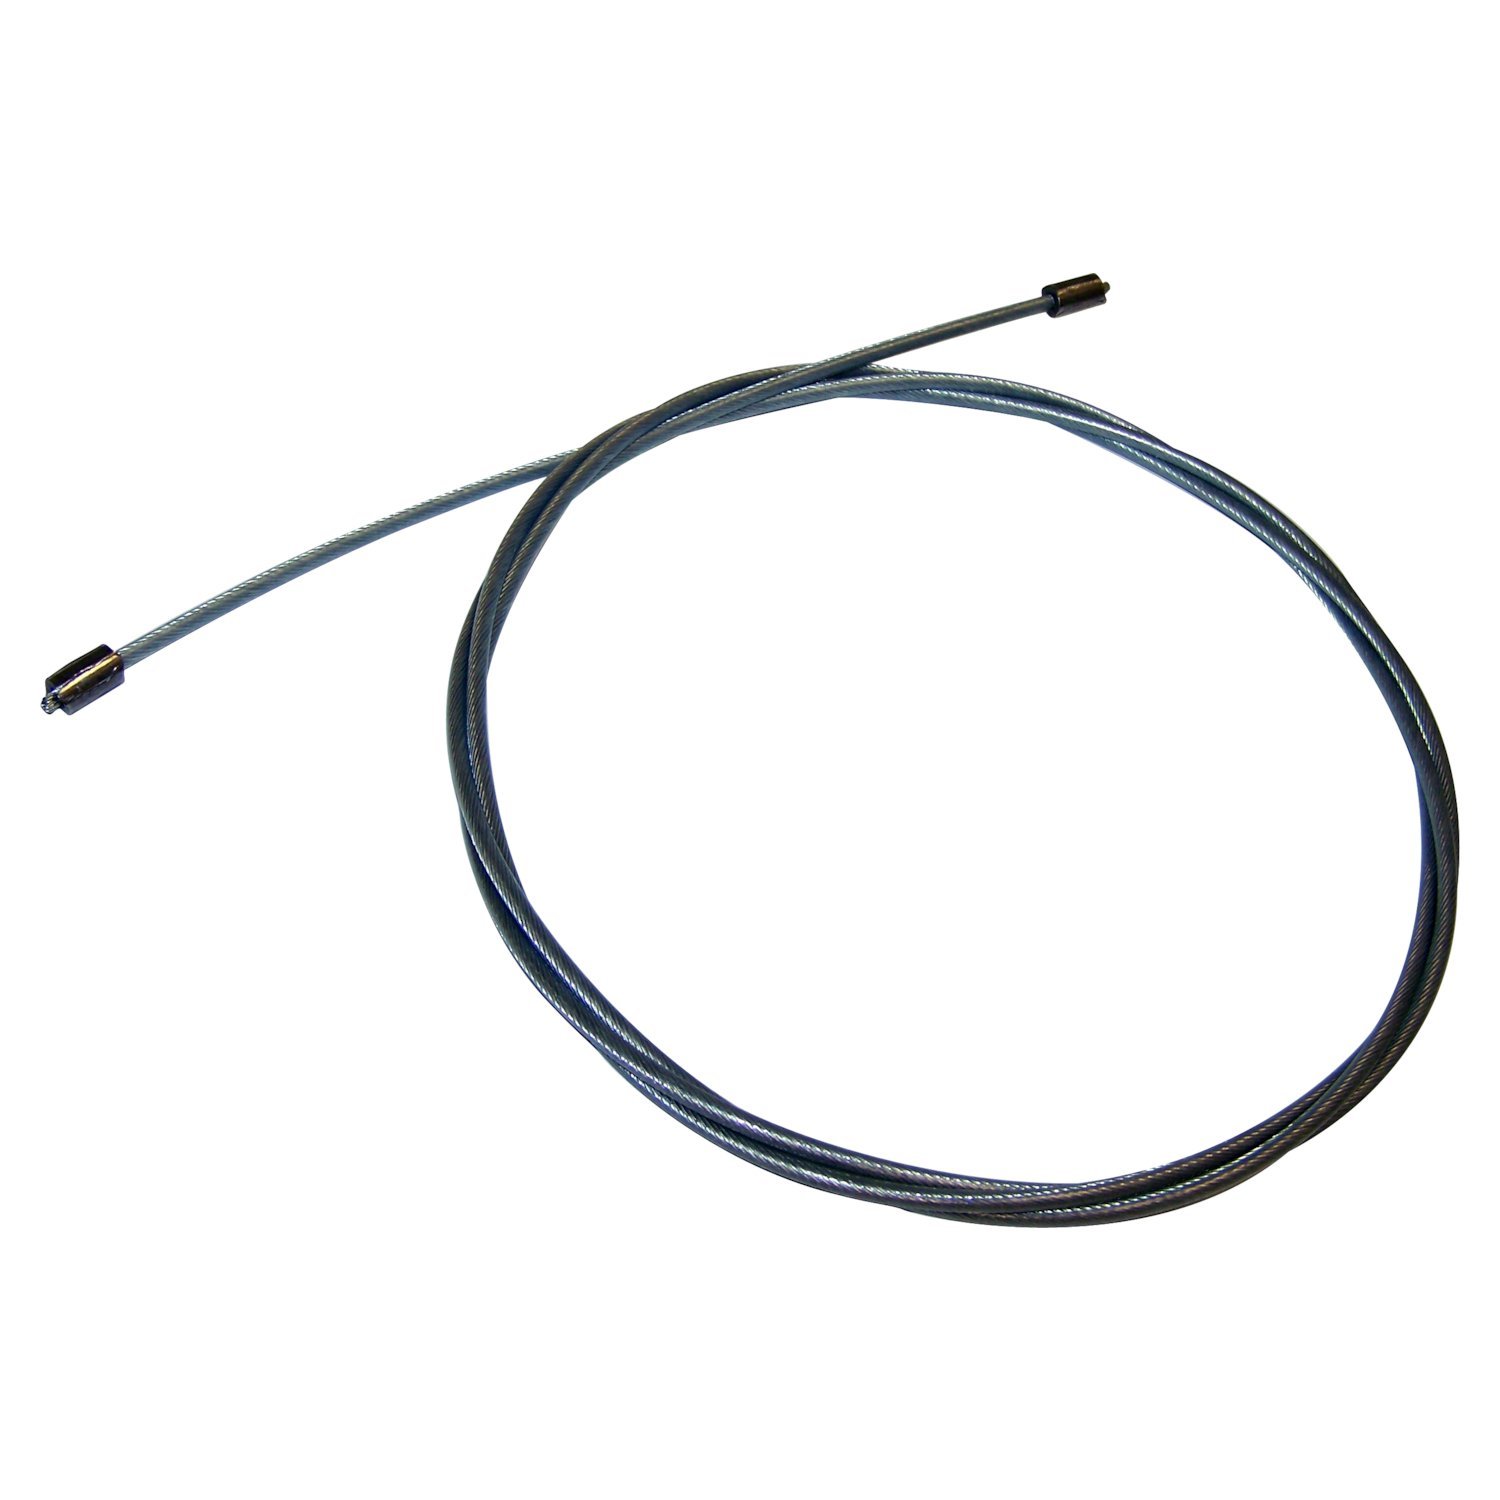 Intermediate Parking Brake Cable for 1976-1979 Jeep J-Series w/ Manual Trans.